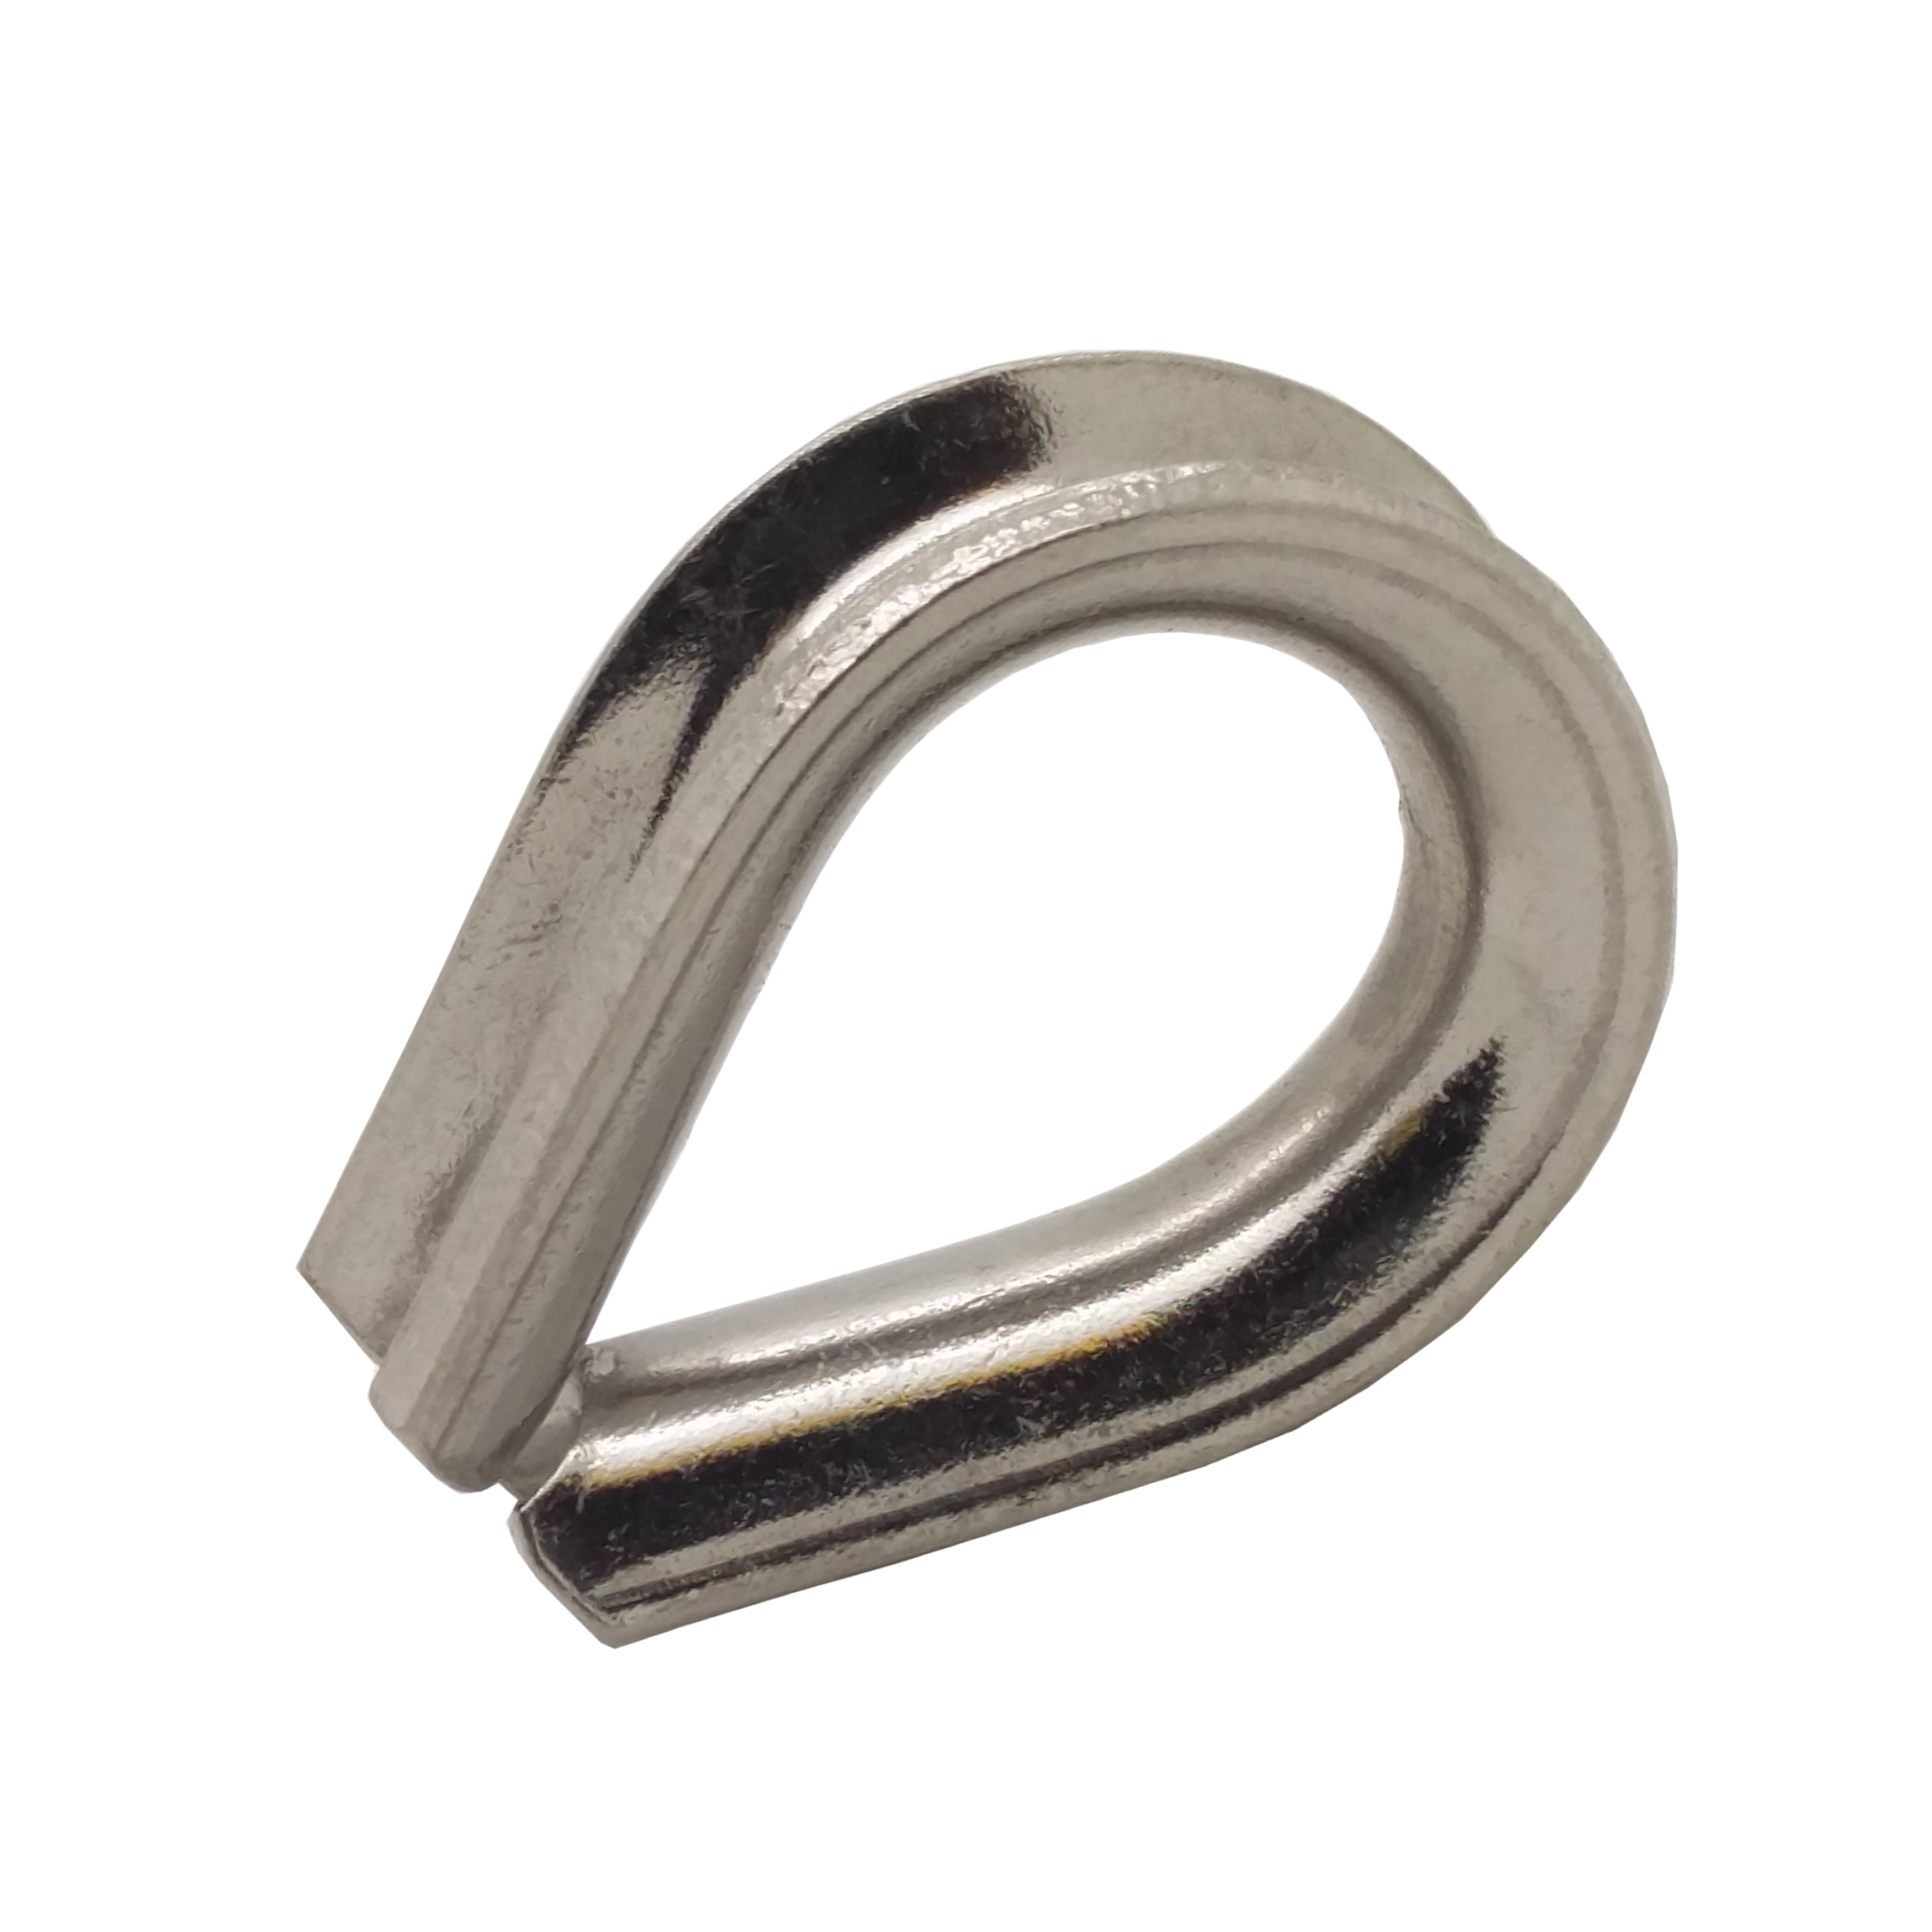 10mm Stainless Steel Wire Rope Thimble Heavy Gauge